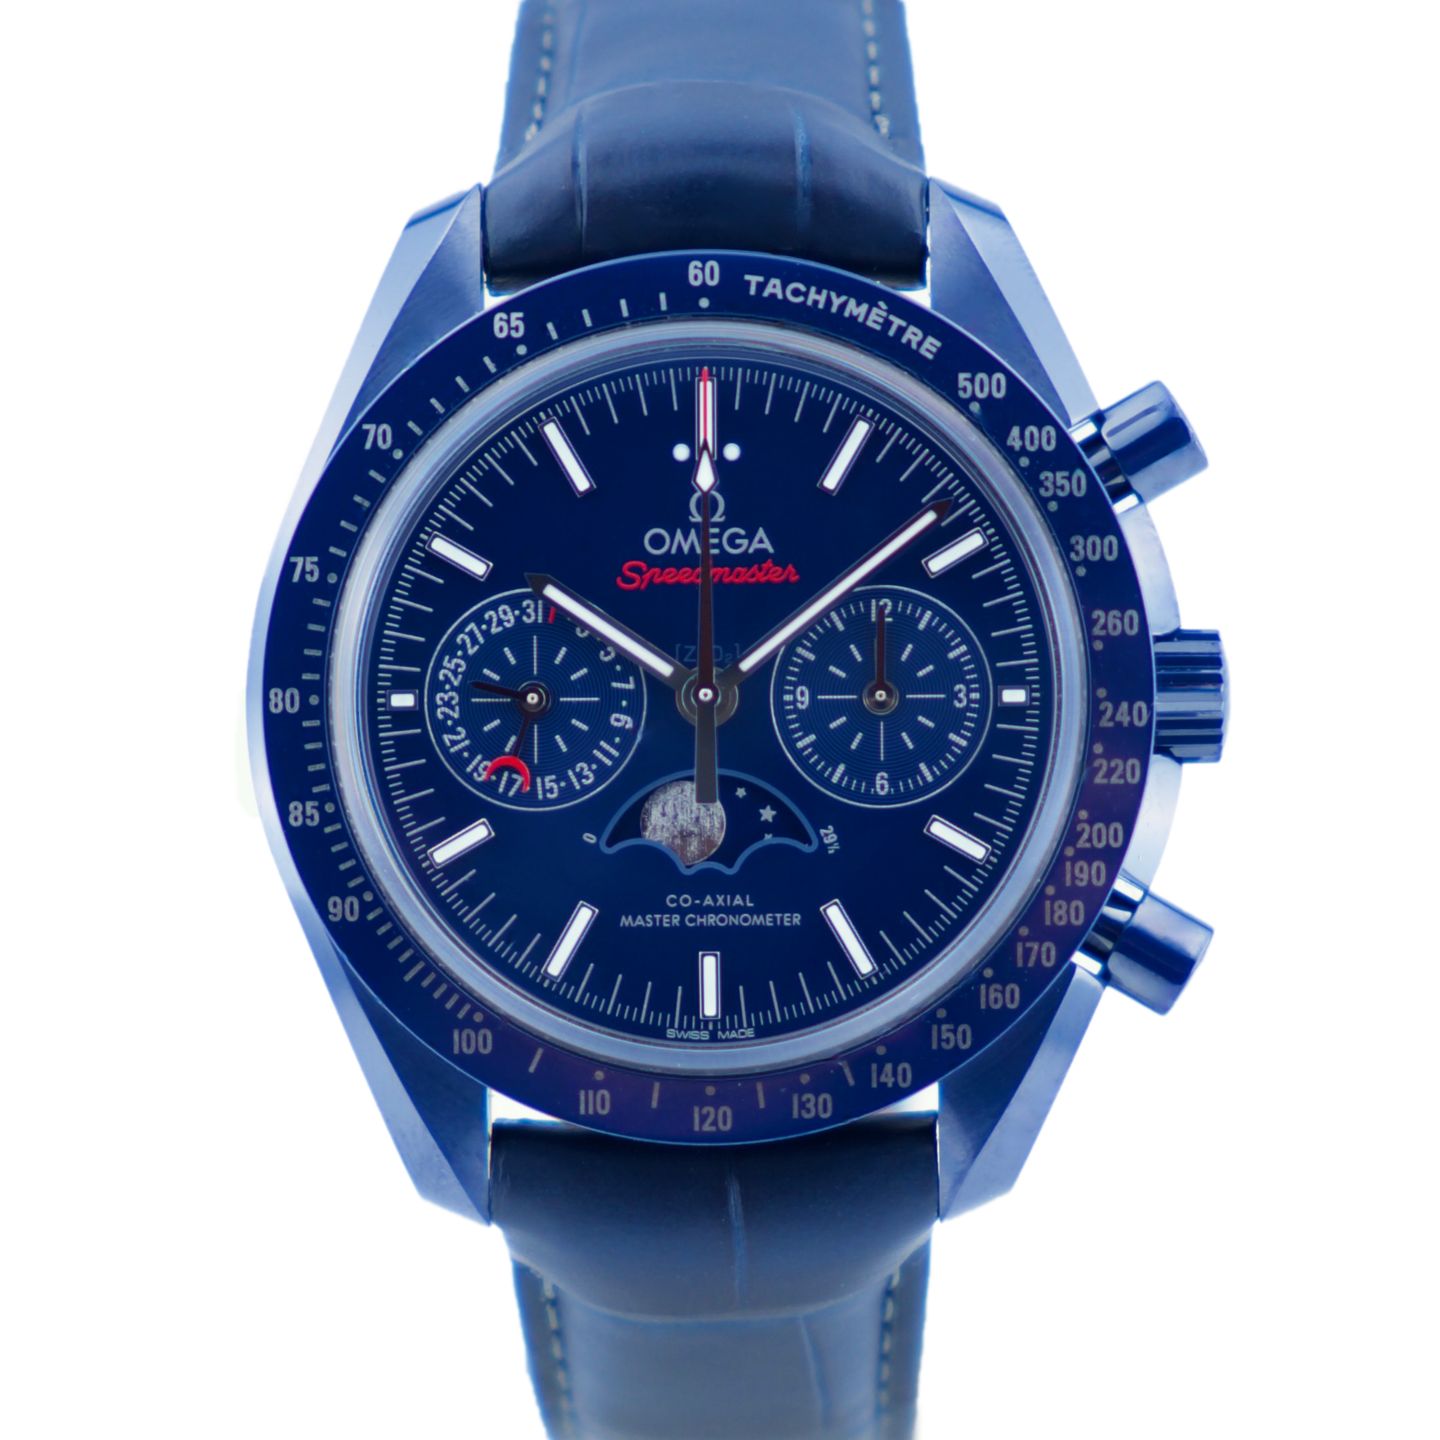 Omega Speedmaster Professional Moonwatch Moonphase 304.93.44.52.03.001 (2023) - Blue dial 44 mm Ceramic case (1/1)